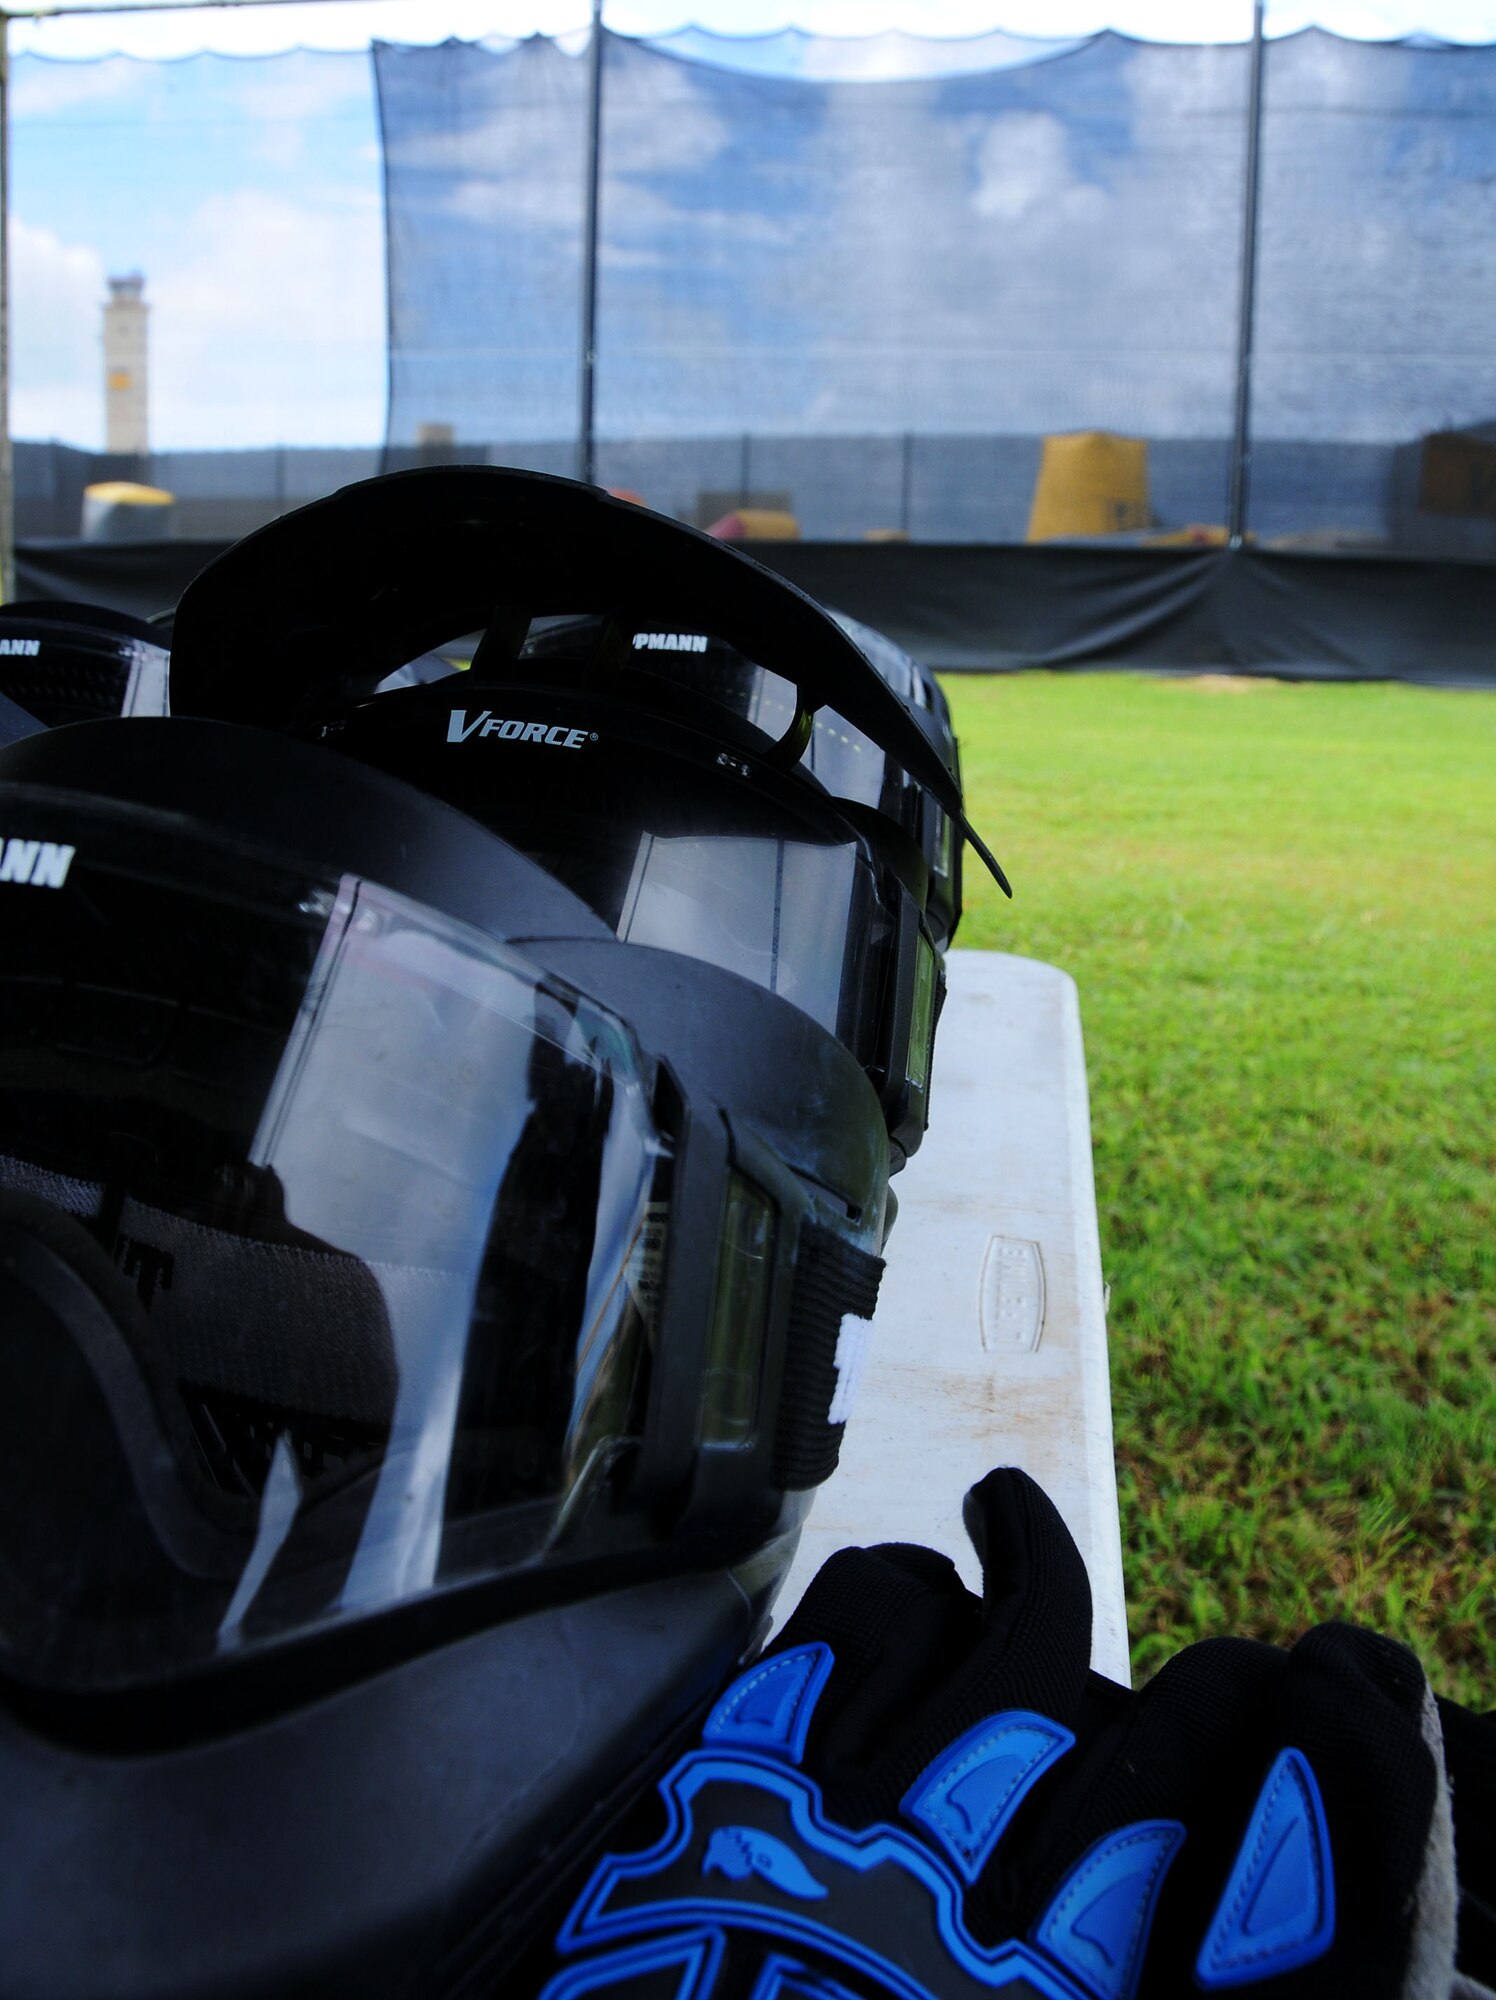 ANDERSEN AIR FORCE BASE, Guam - Equipment stands ready before the grand opening ceremony of the new paintball complex here Sept. 26. The pro shop of the paintball complex sells and rents assorted gear and accessories. (U.S. Air Force photo by Airman 1st Class Courtney Witt)